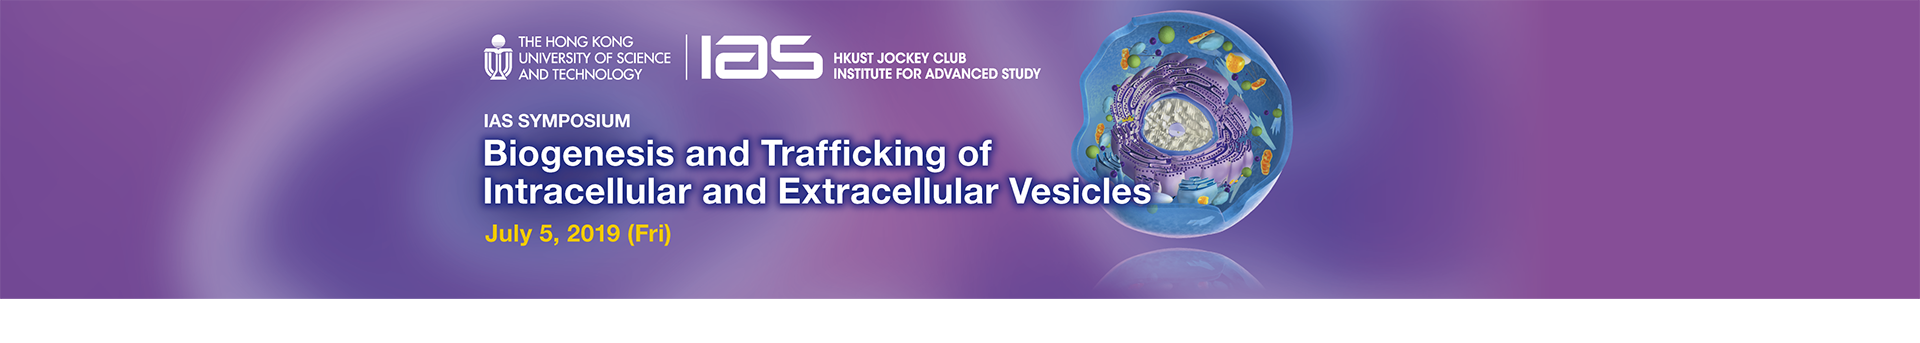 IAS Symposium on Biogenesis and Trafficking of Intracellular and Extracellular Vesicles (Jul 5,2019)